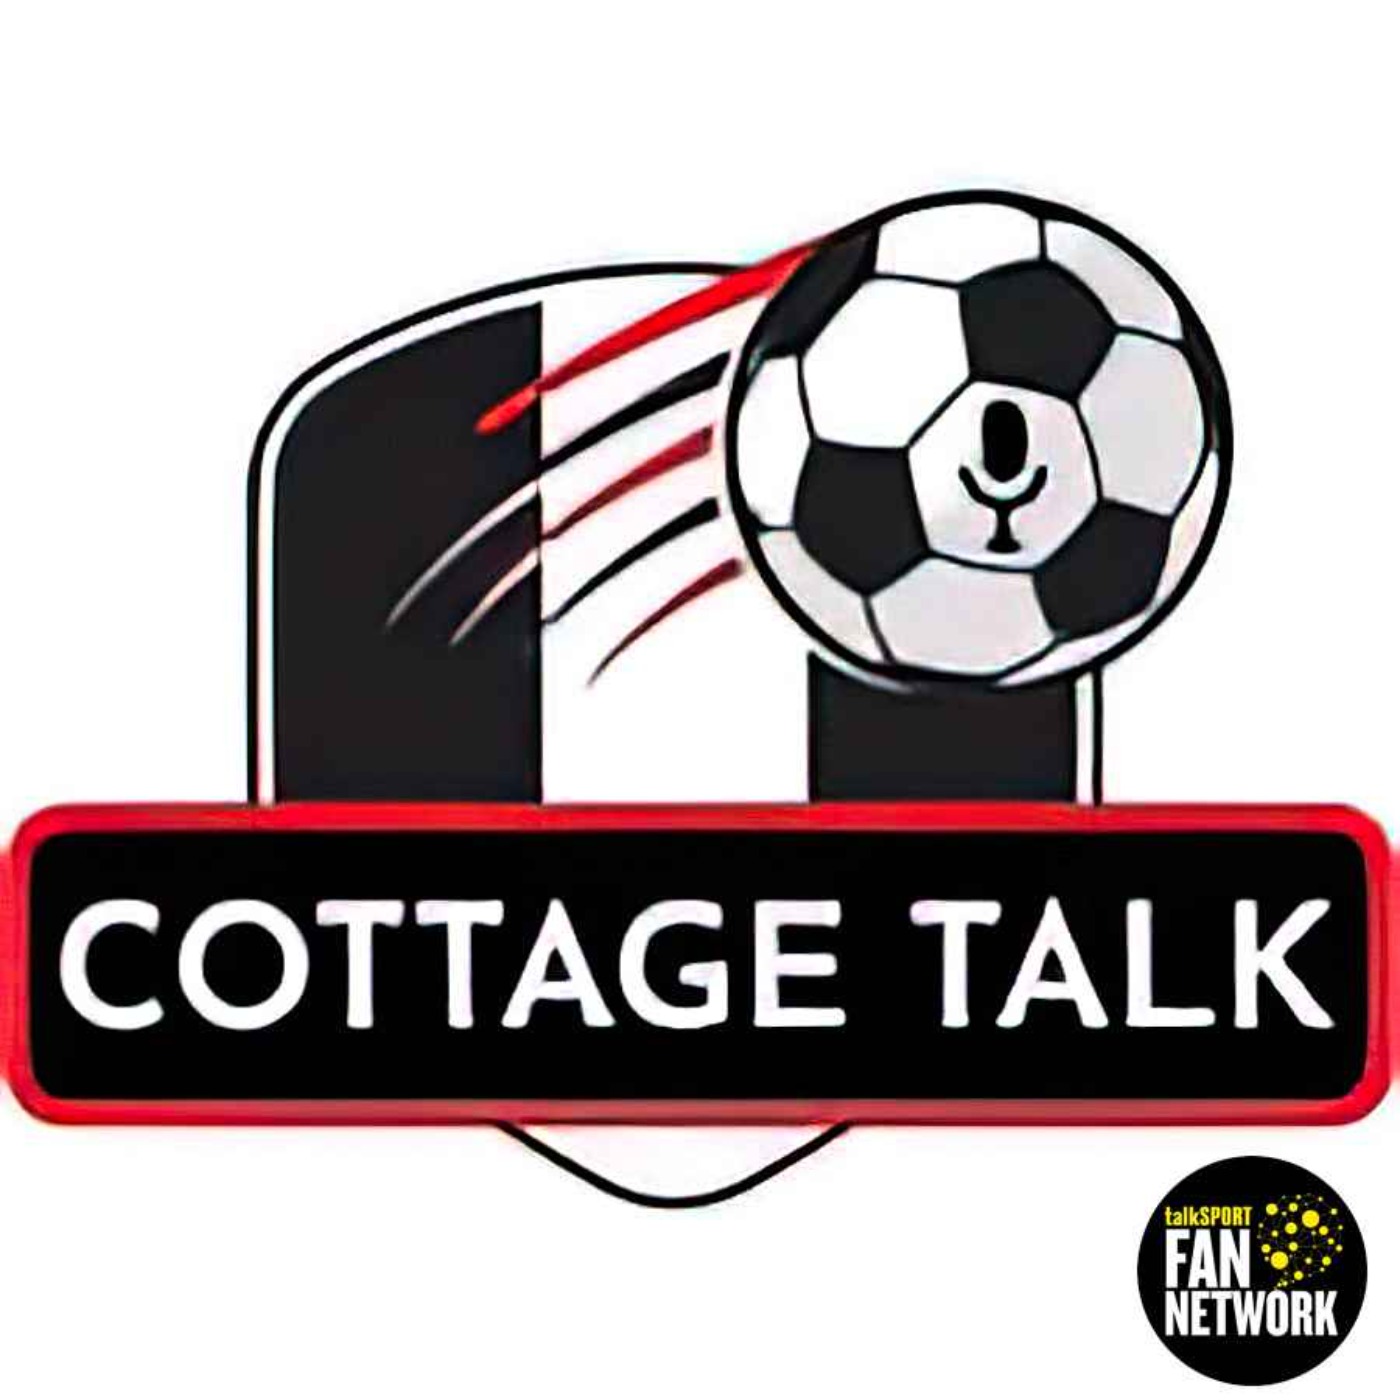 Cottage Talk Preview: My Keys To Victory For Fulham Against Tottenham Hotspur